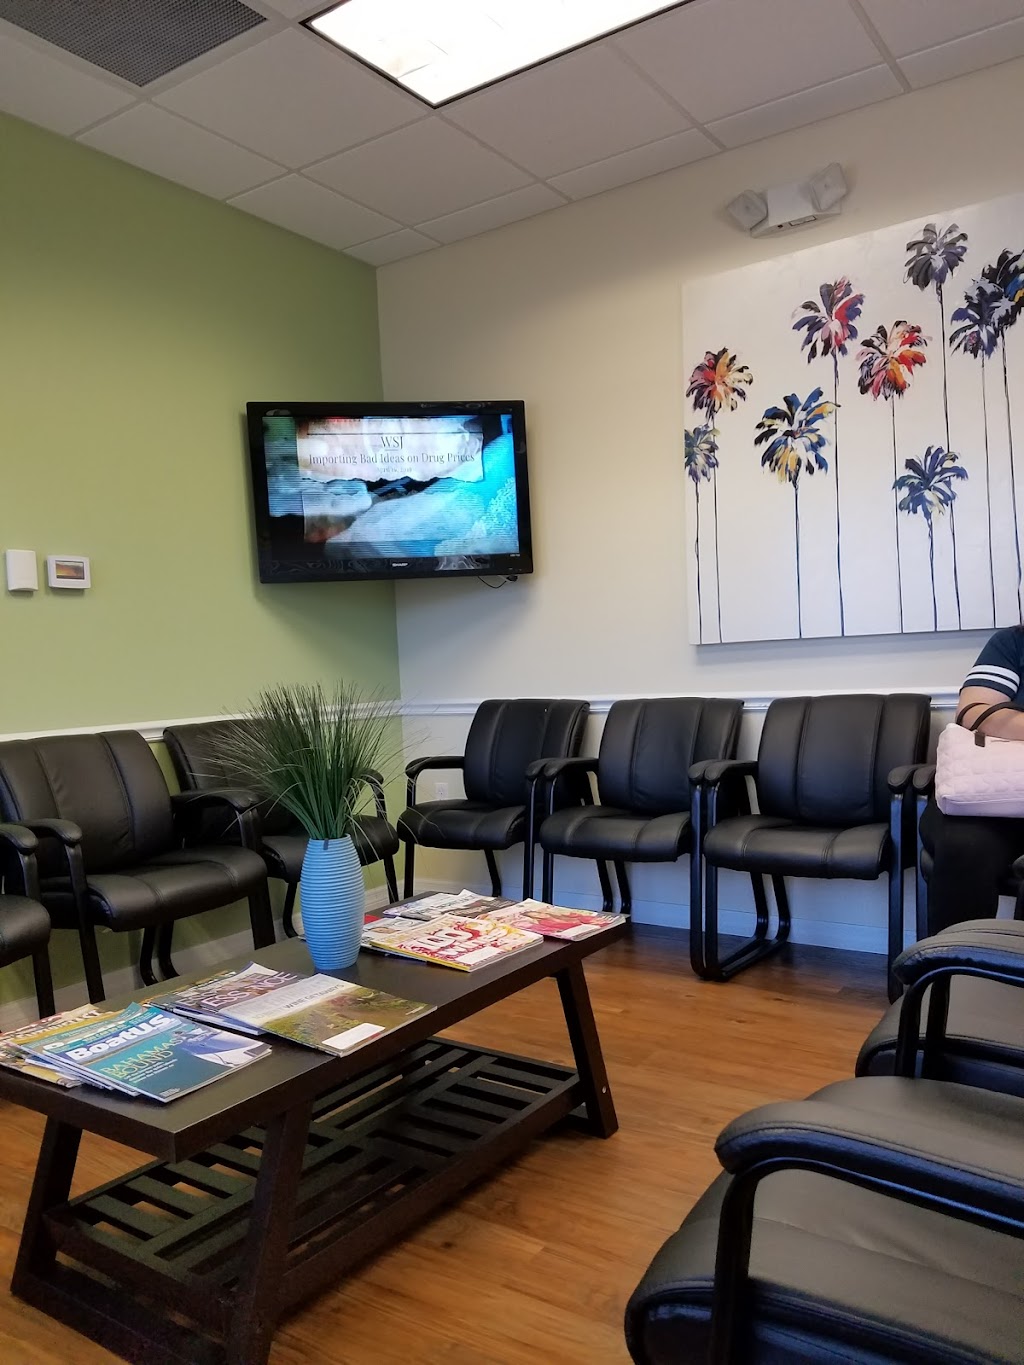 Advanced Dental Care of Clearwater | 3690 E Bay Dr Ste K, Largo, FL 33771 | Phone: (727) 286-3945